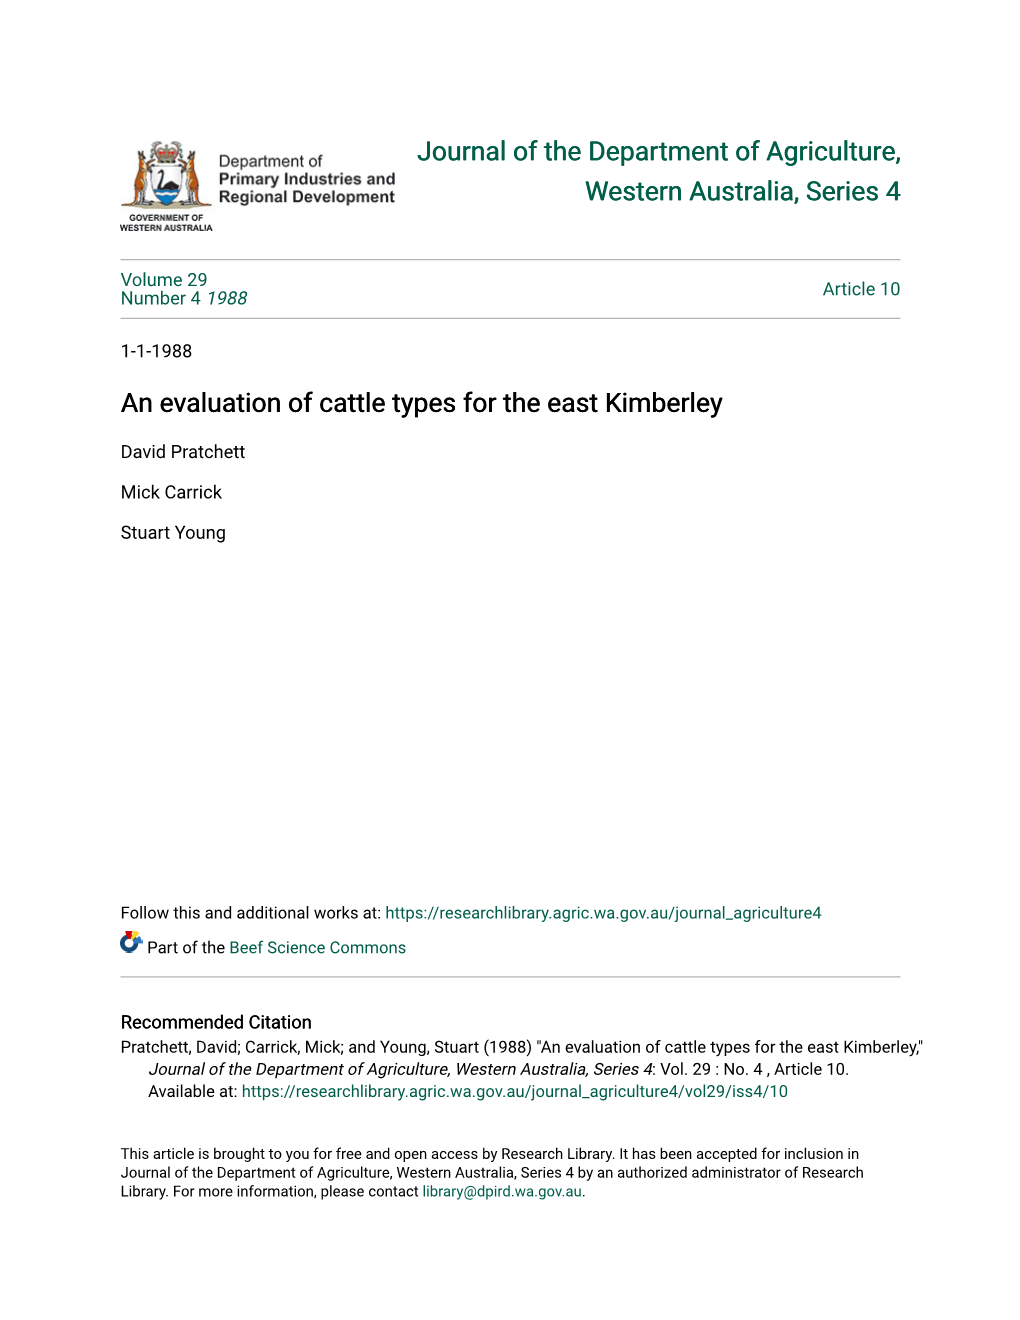 An Evaluation of Cattle Types for the East Kimberley